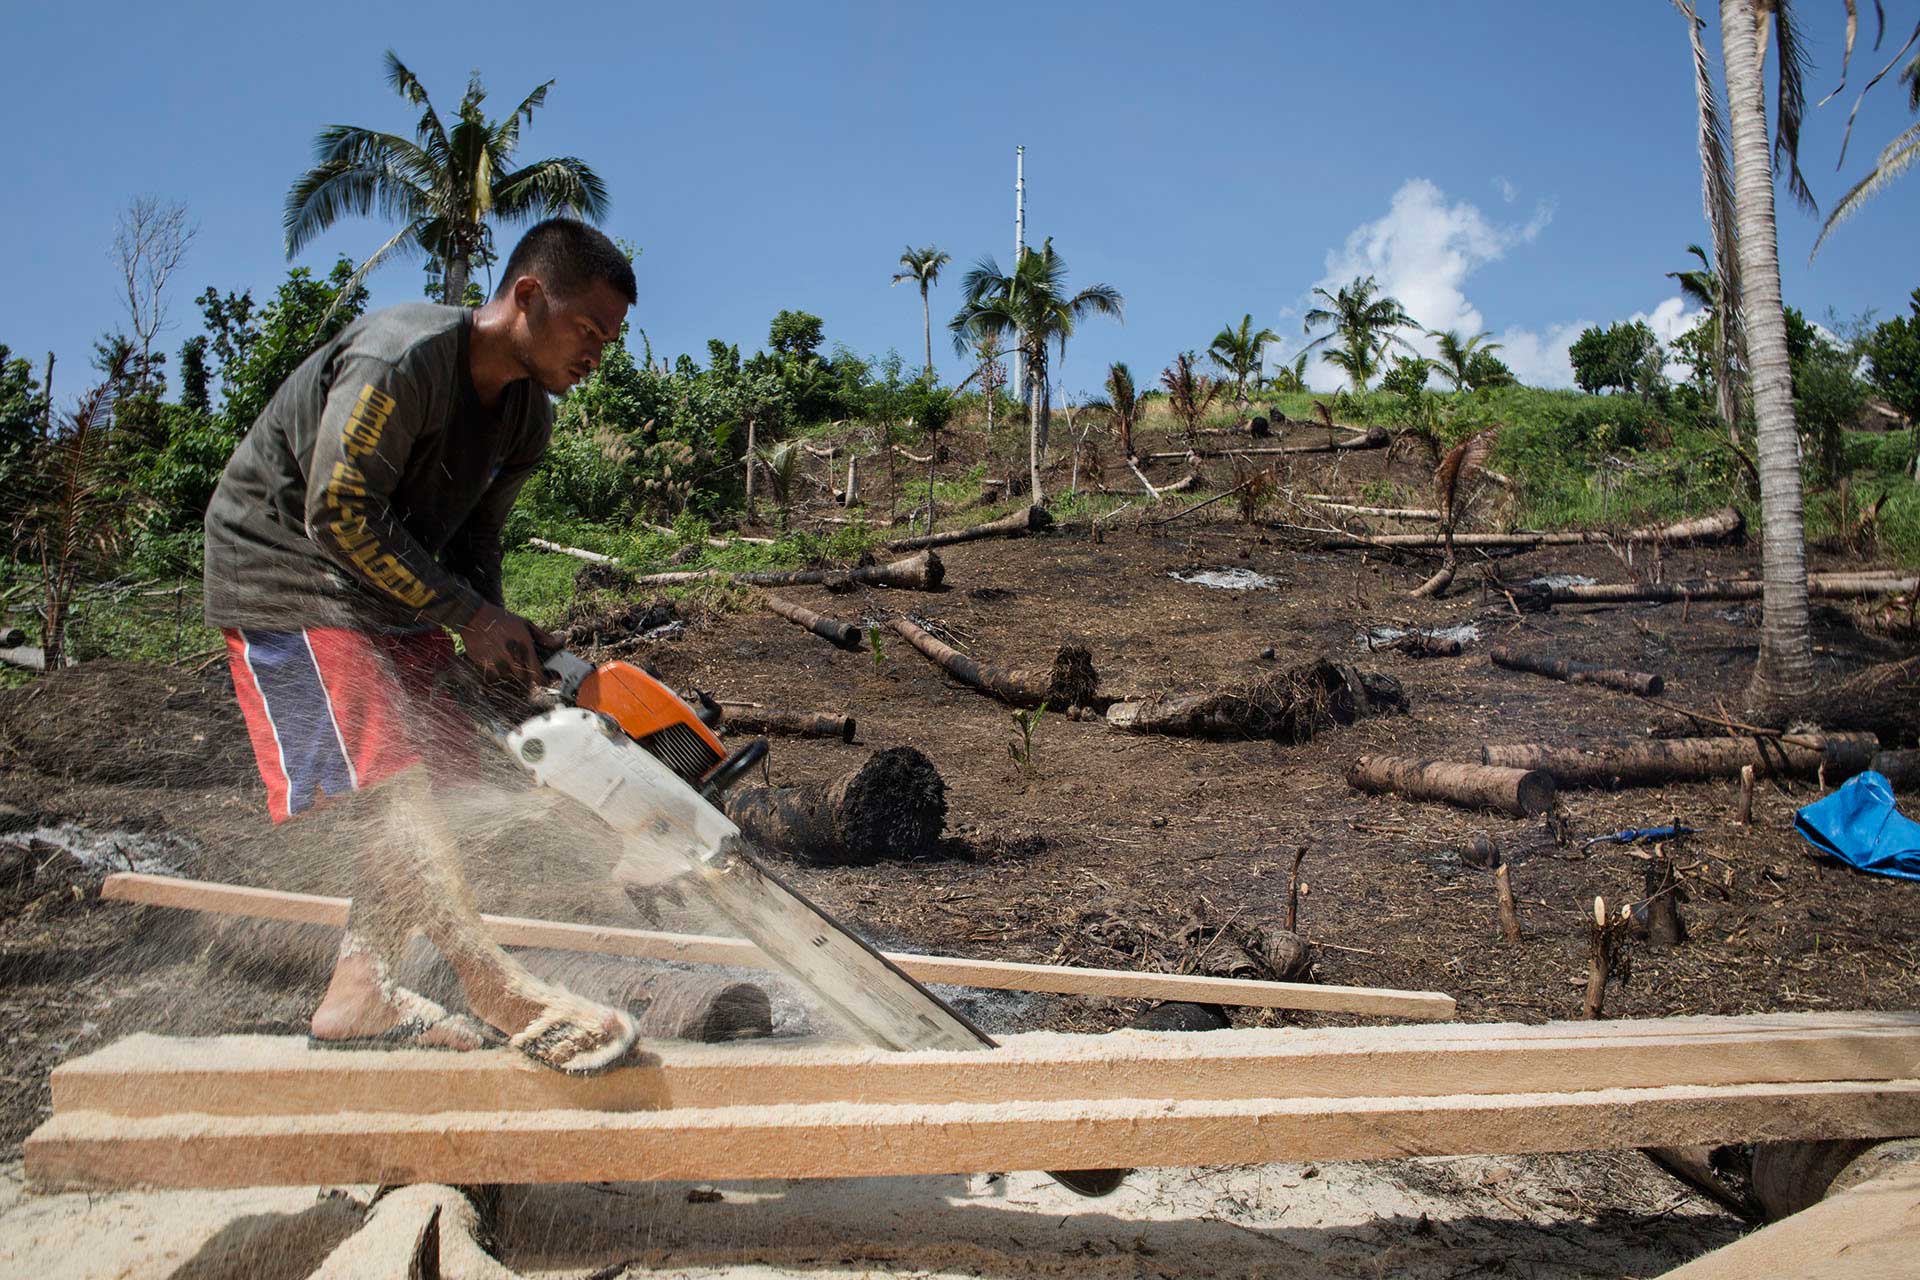 Ronald Barsana saws felled coconut trees in Maslog, the Philippines, on Oct. 6, 2014